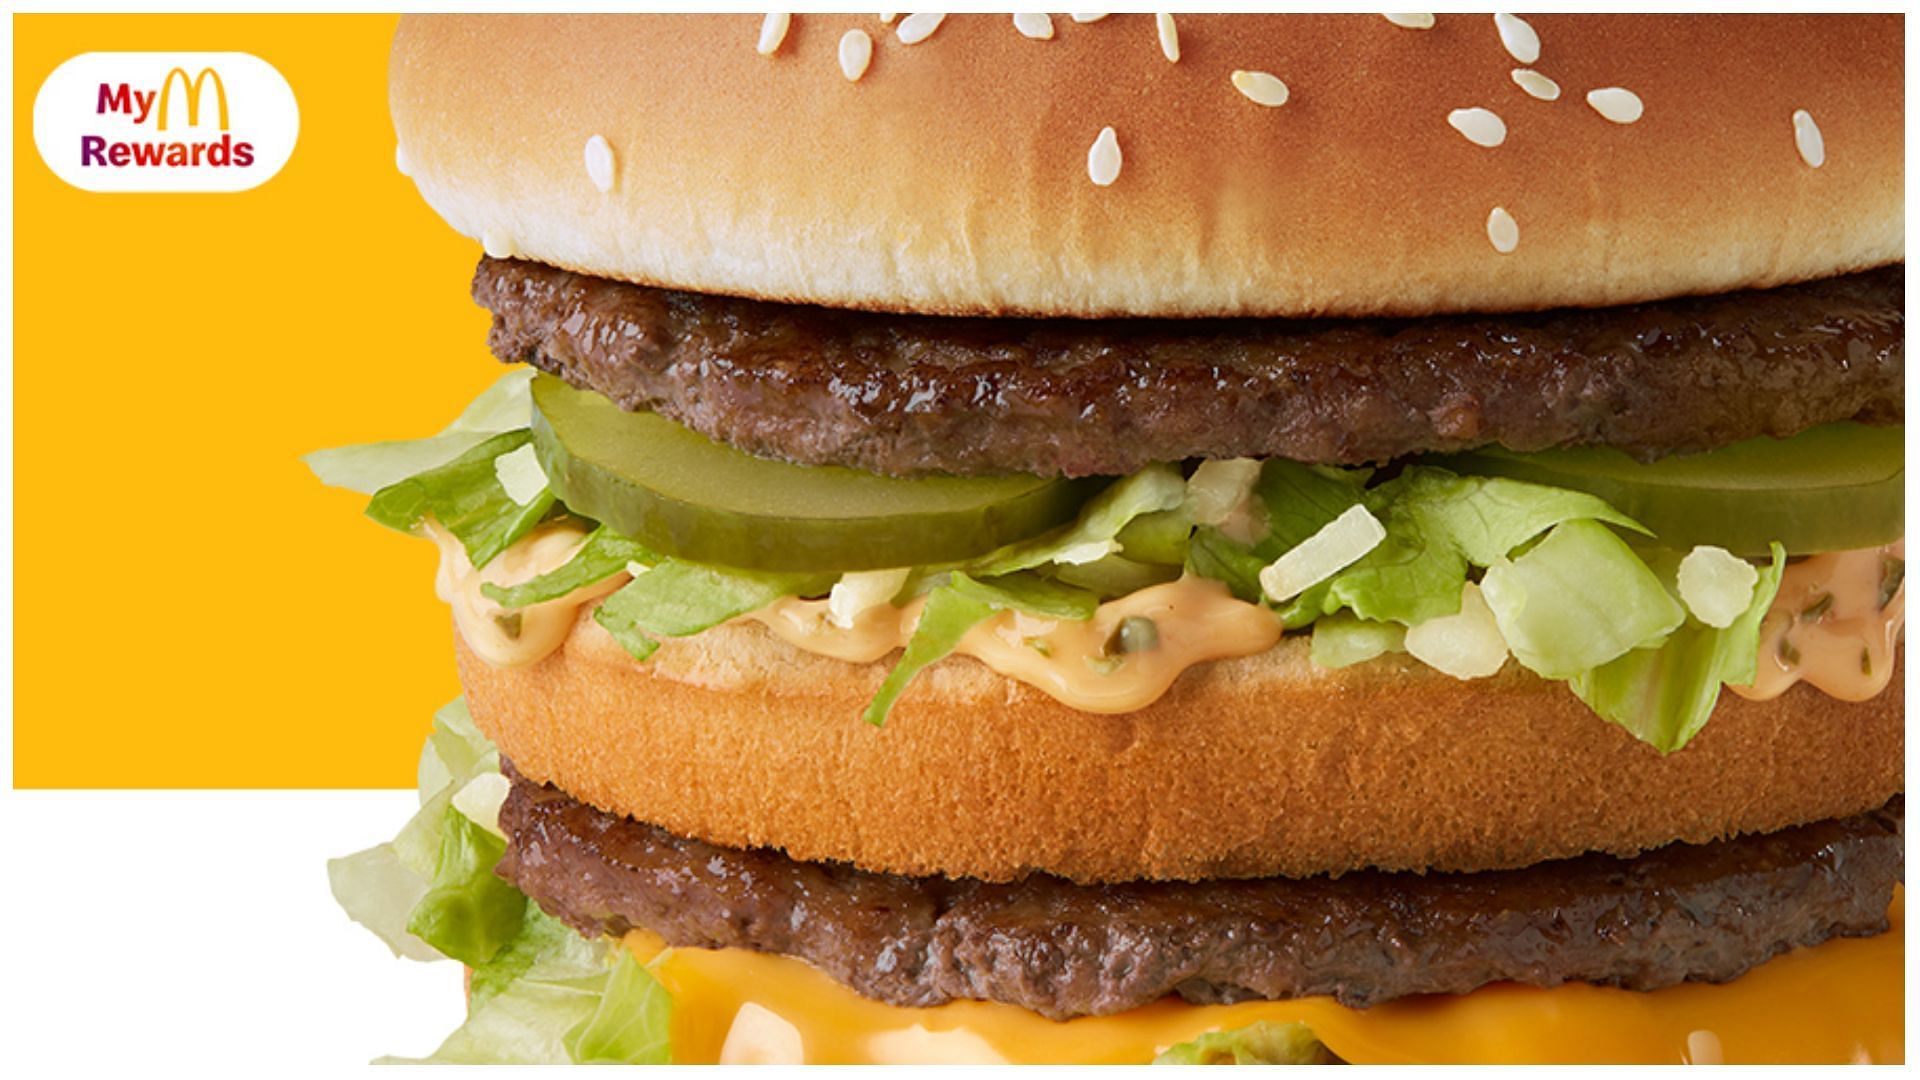 Free Big Mac offer for new users (Image via McDonald&rsquo;s)